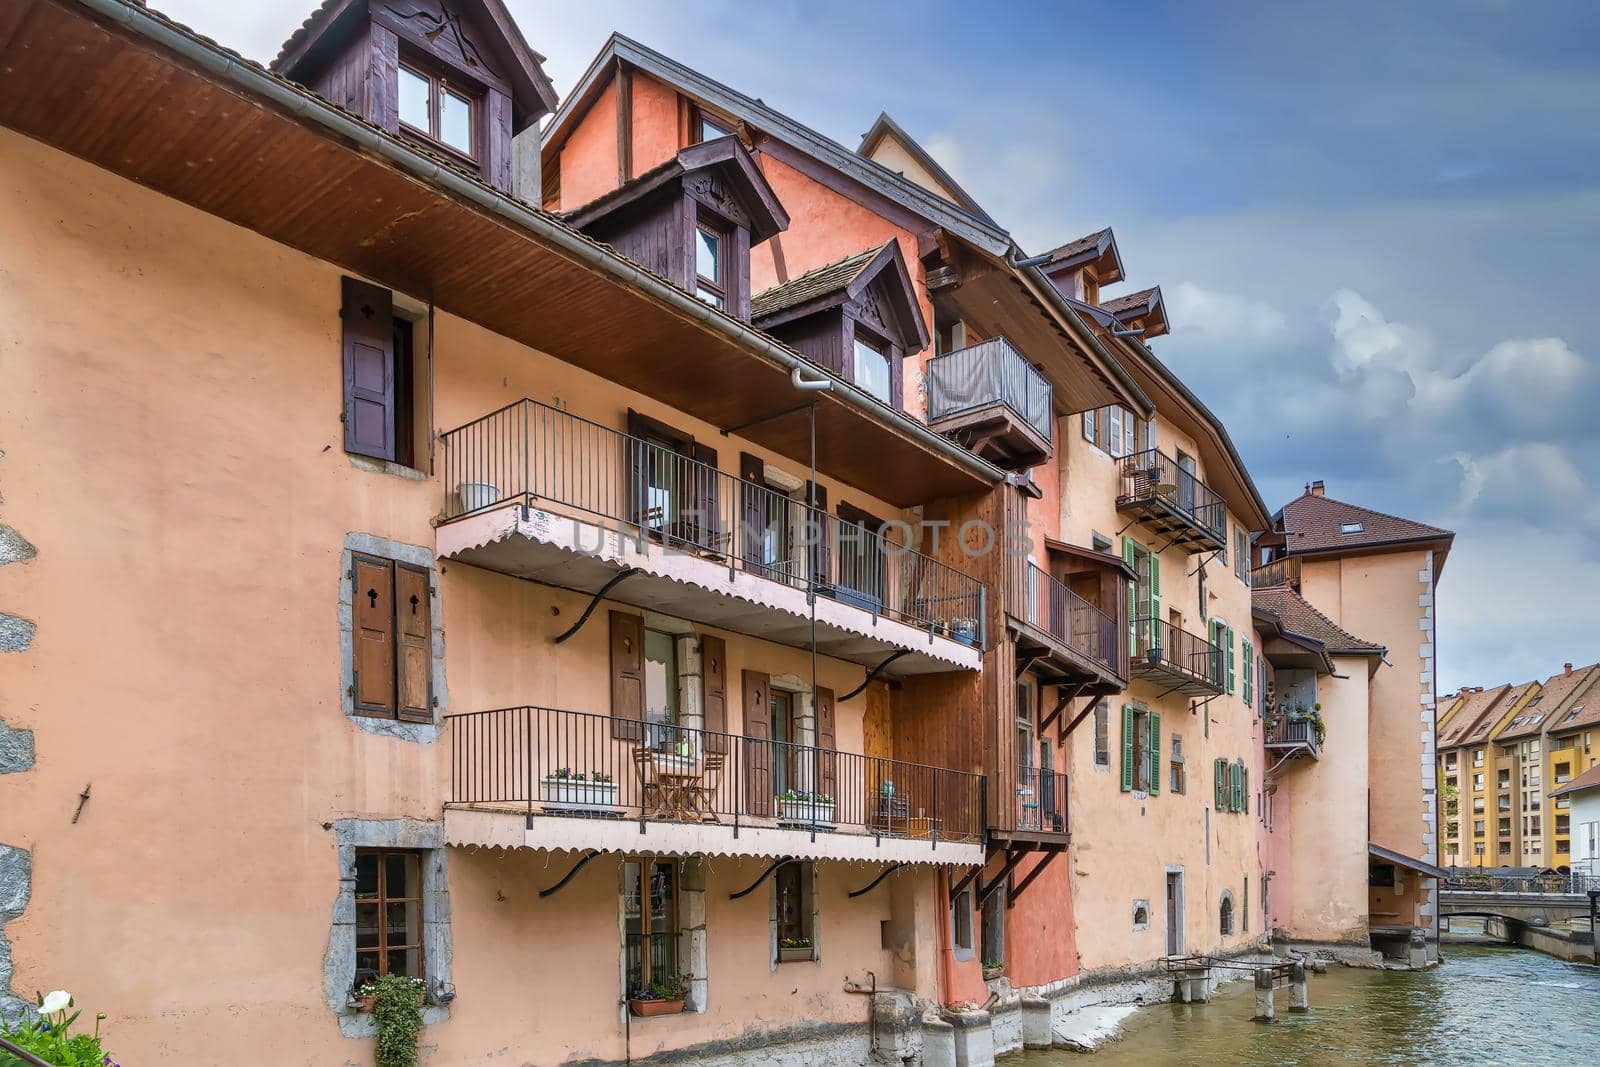 Historic houses along the Thiou river in Annecy old town, France